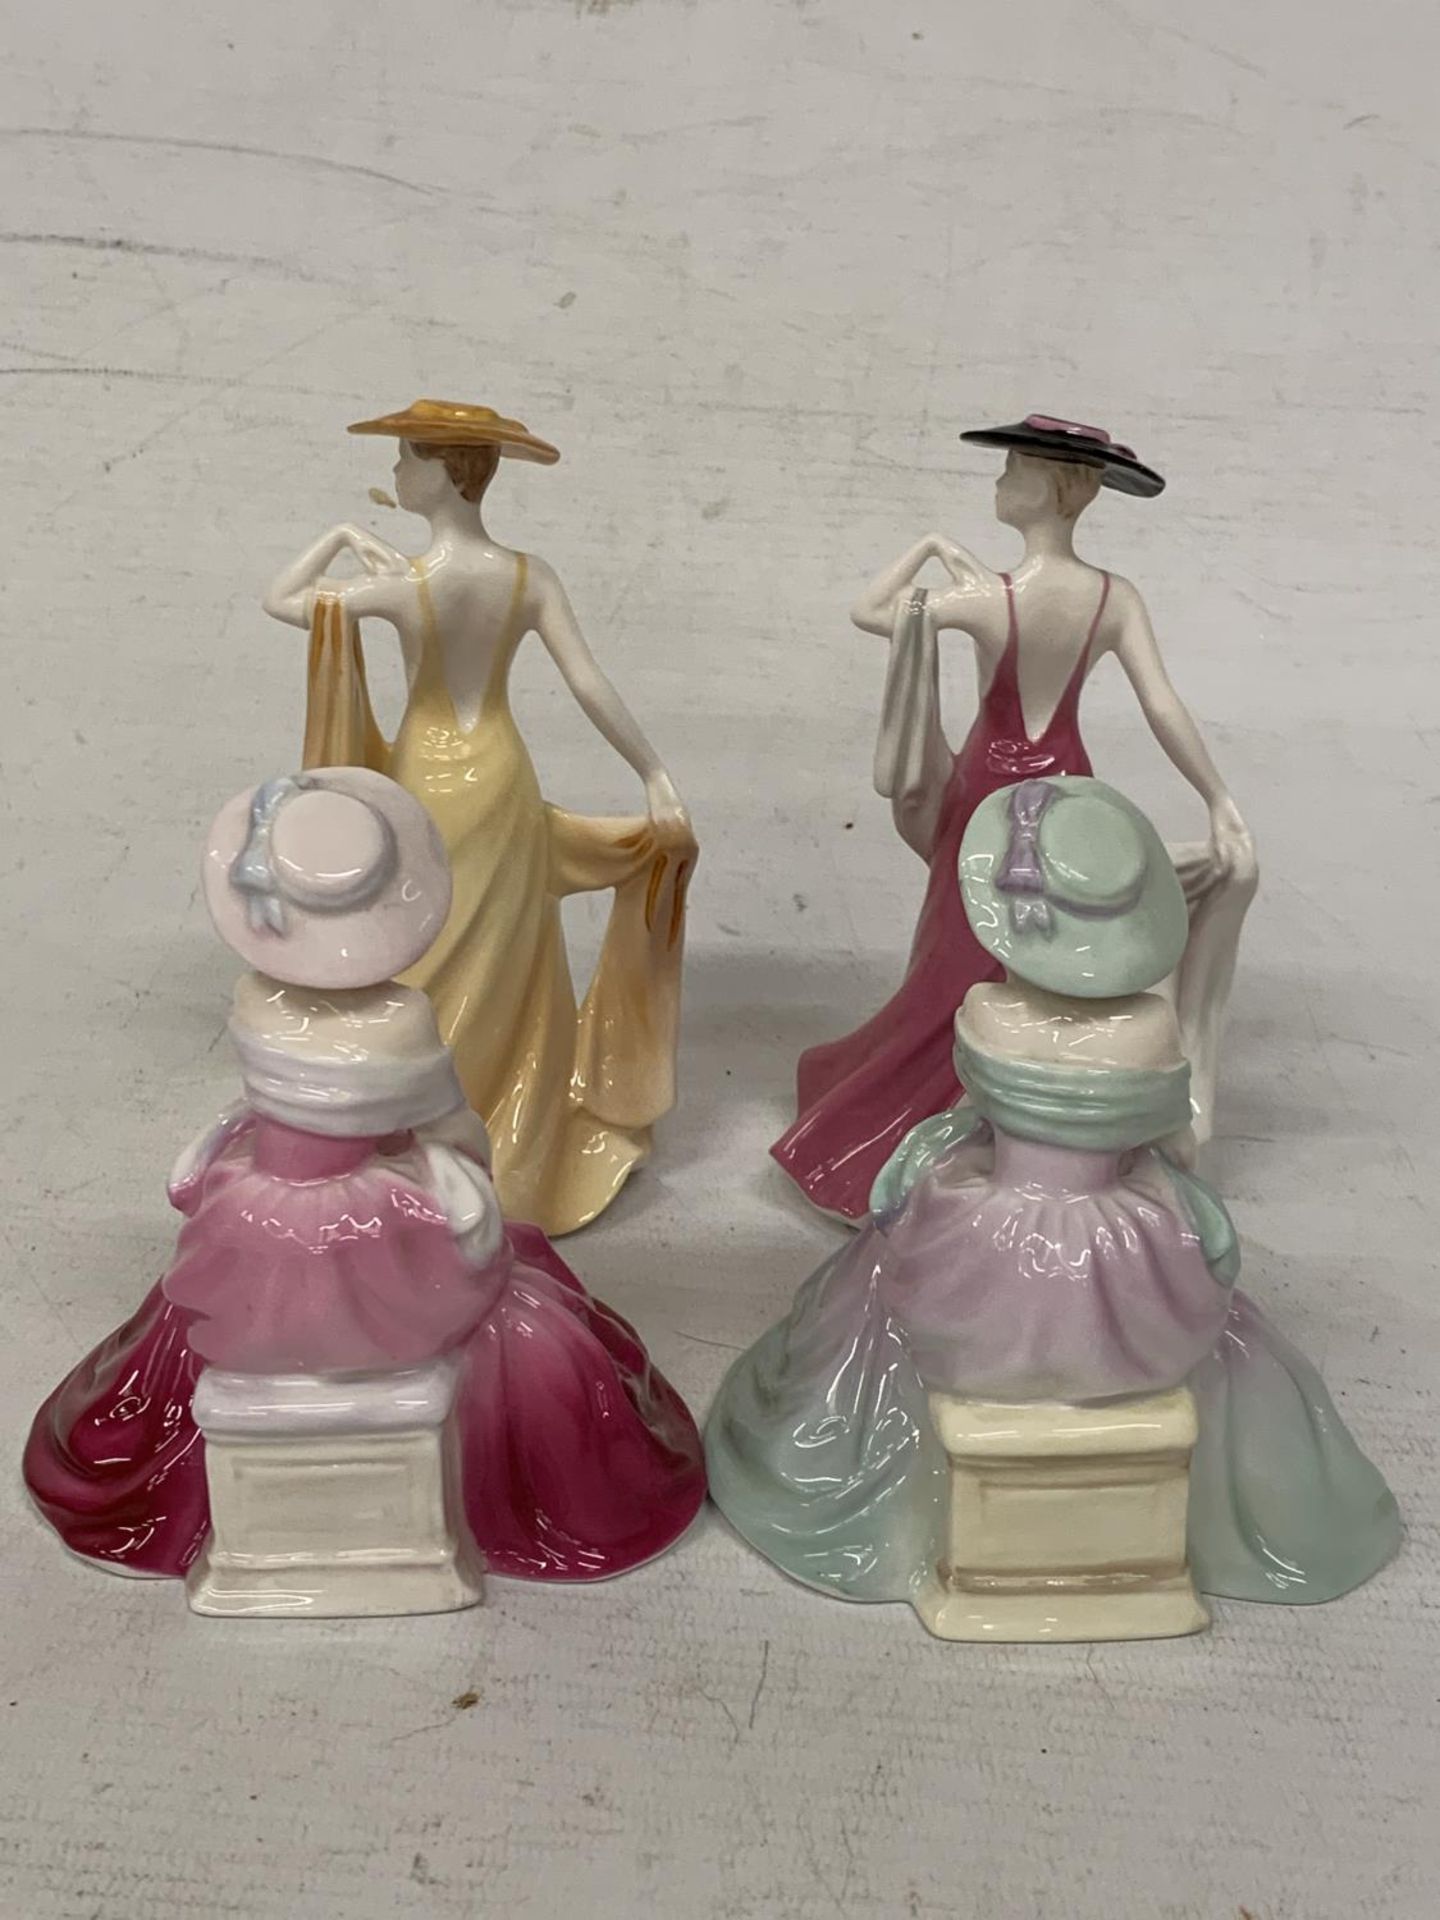 FOUR SMALL COALPORT FIGURINES "FASCINATION" "IN LOVE" "APRIL" AND "POPPY" - Image 3 of 4